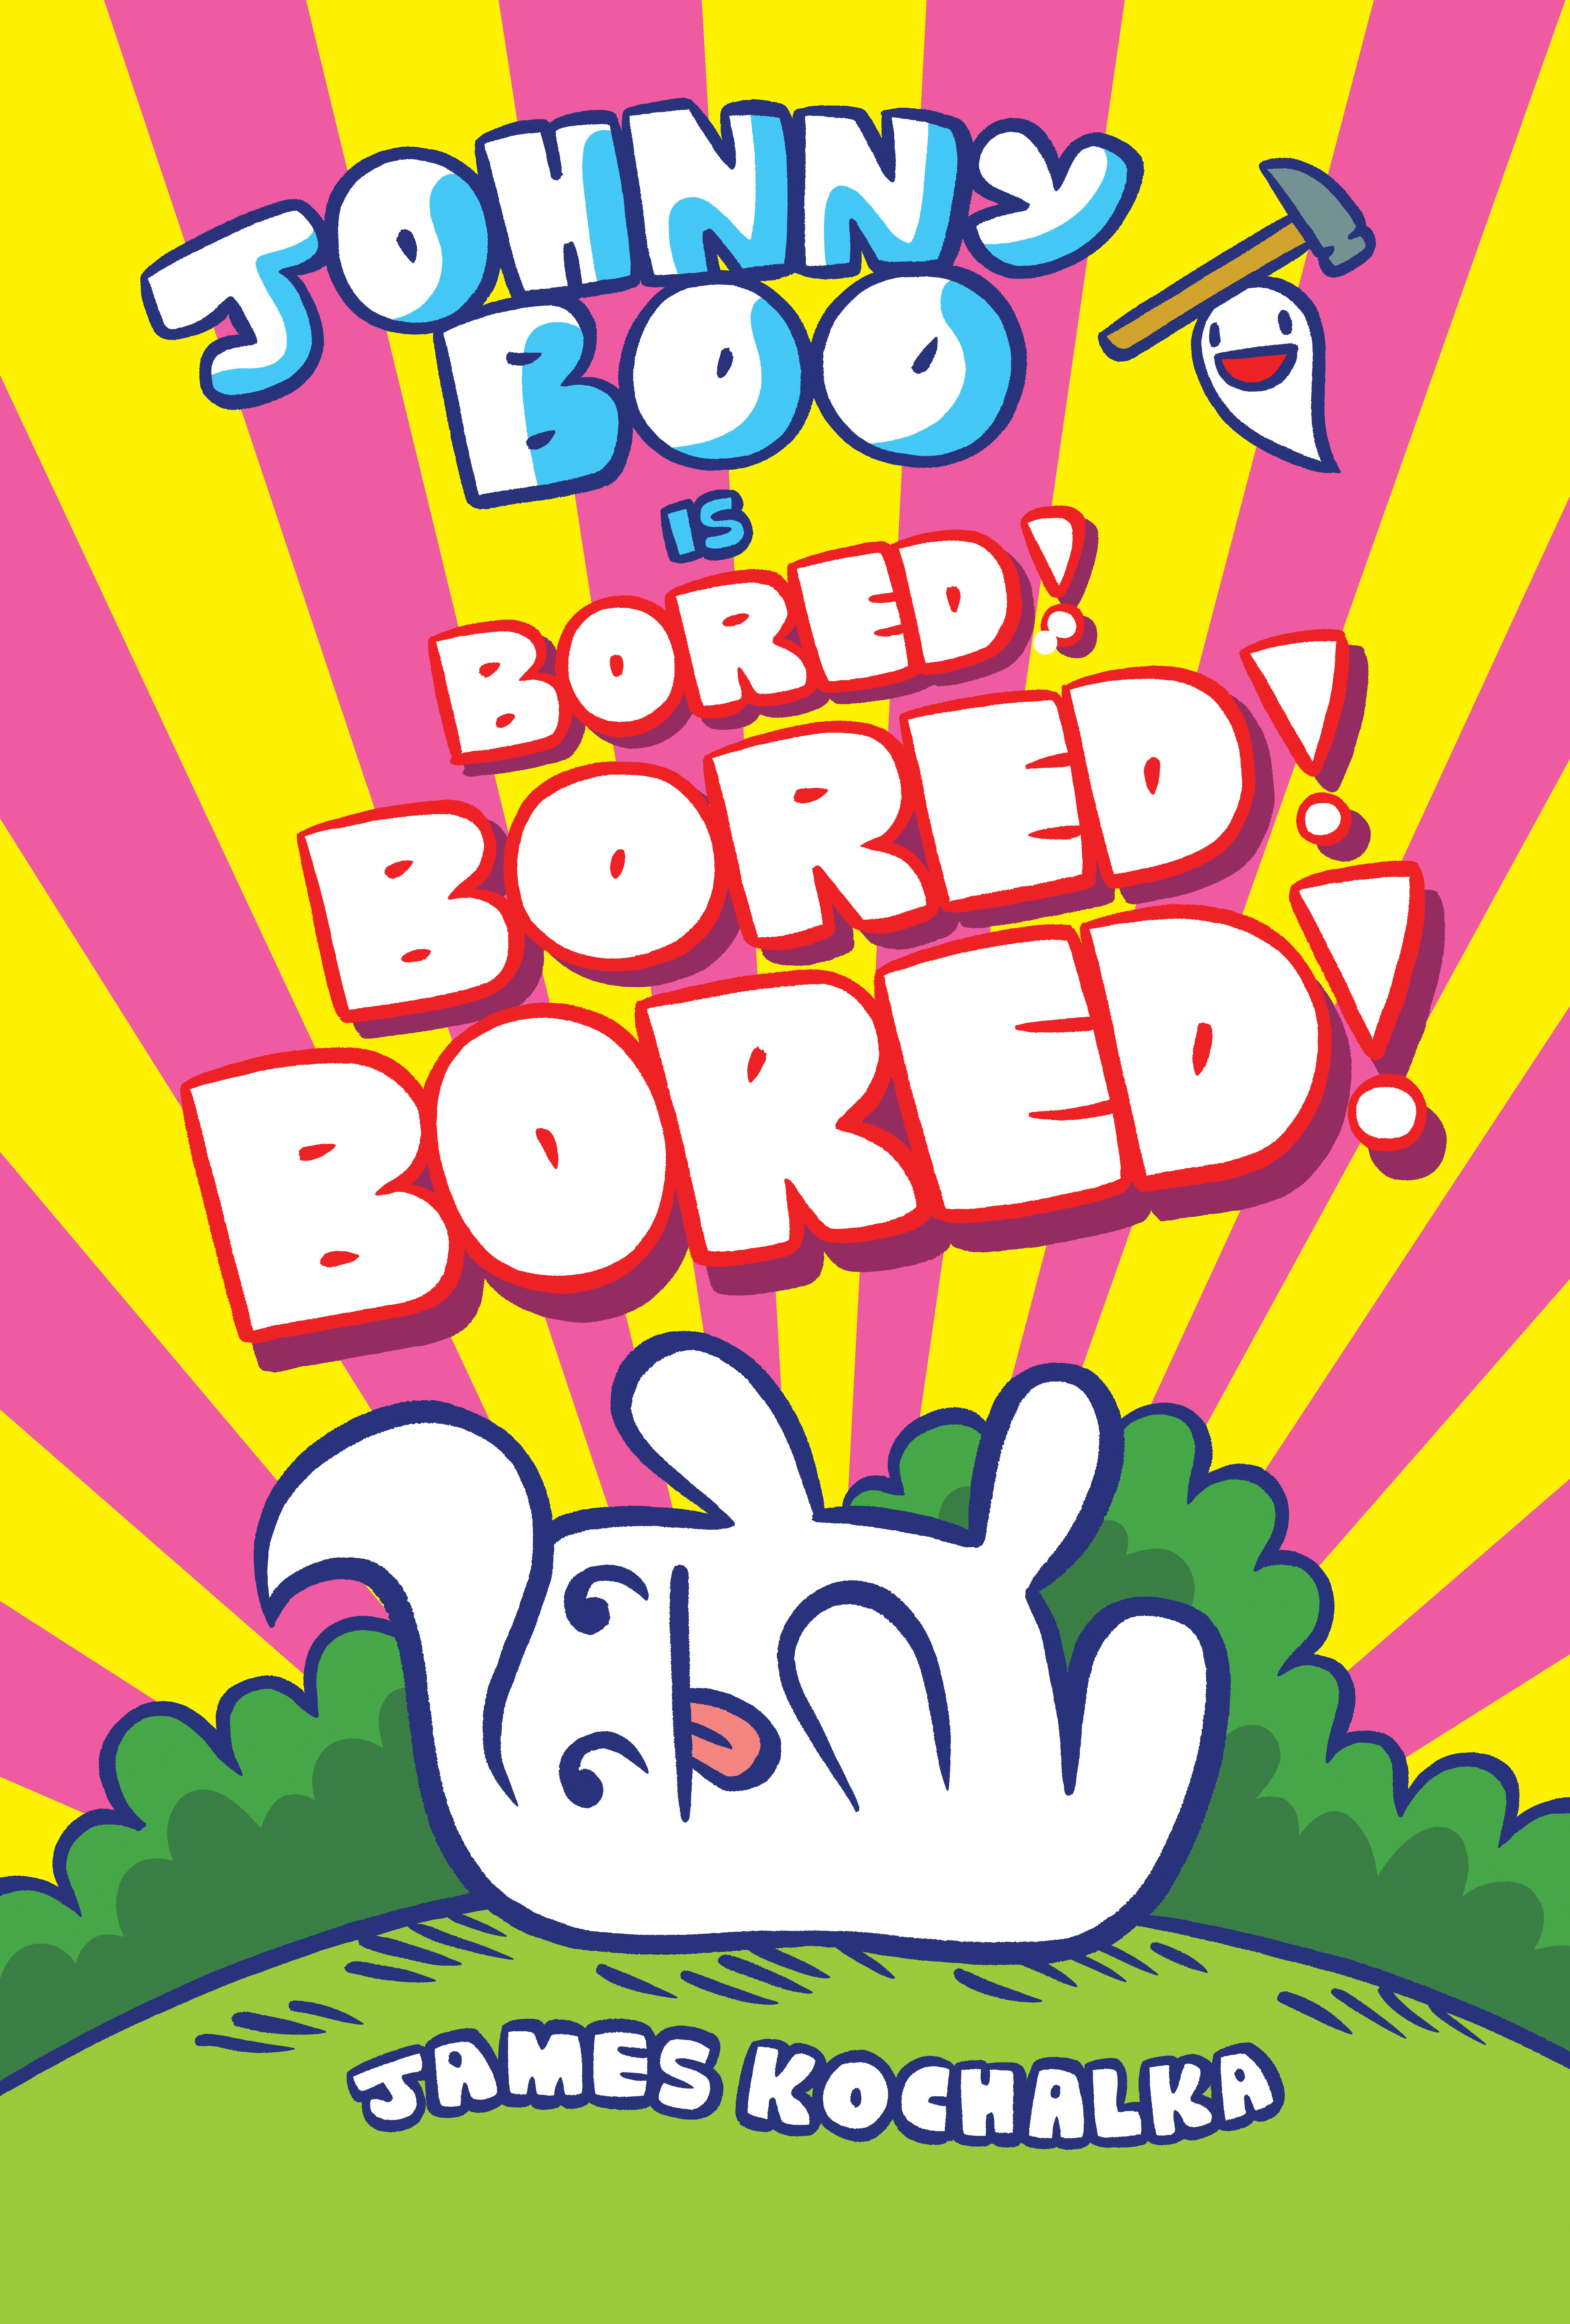 Johnny Boo Hardcover Volume 14 Is Bored! Bored! Bored!